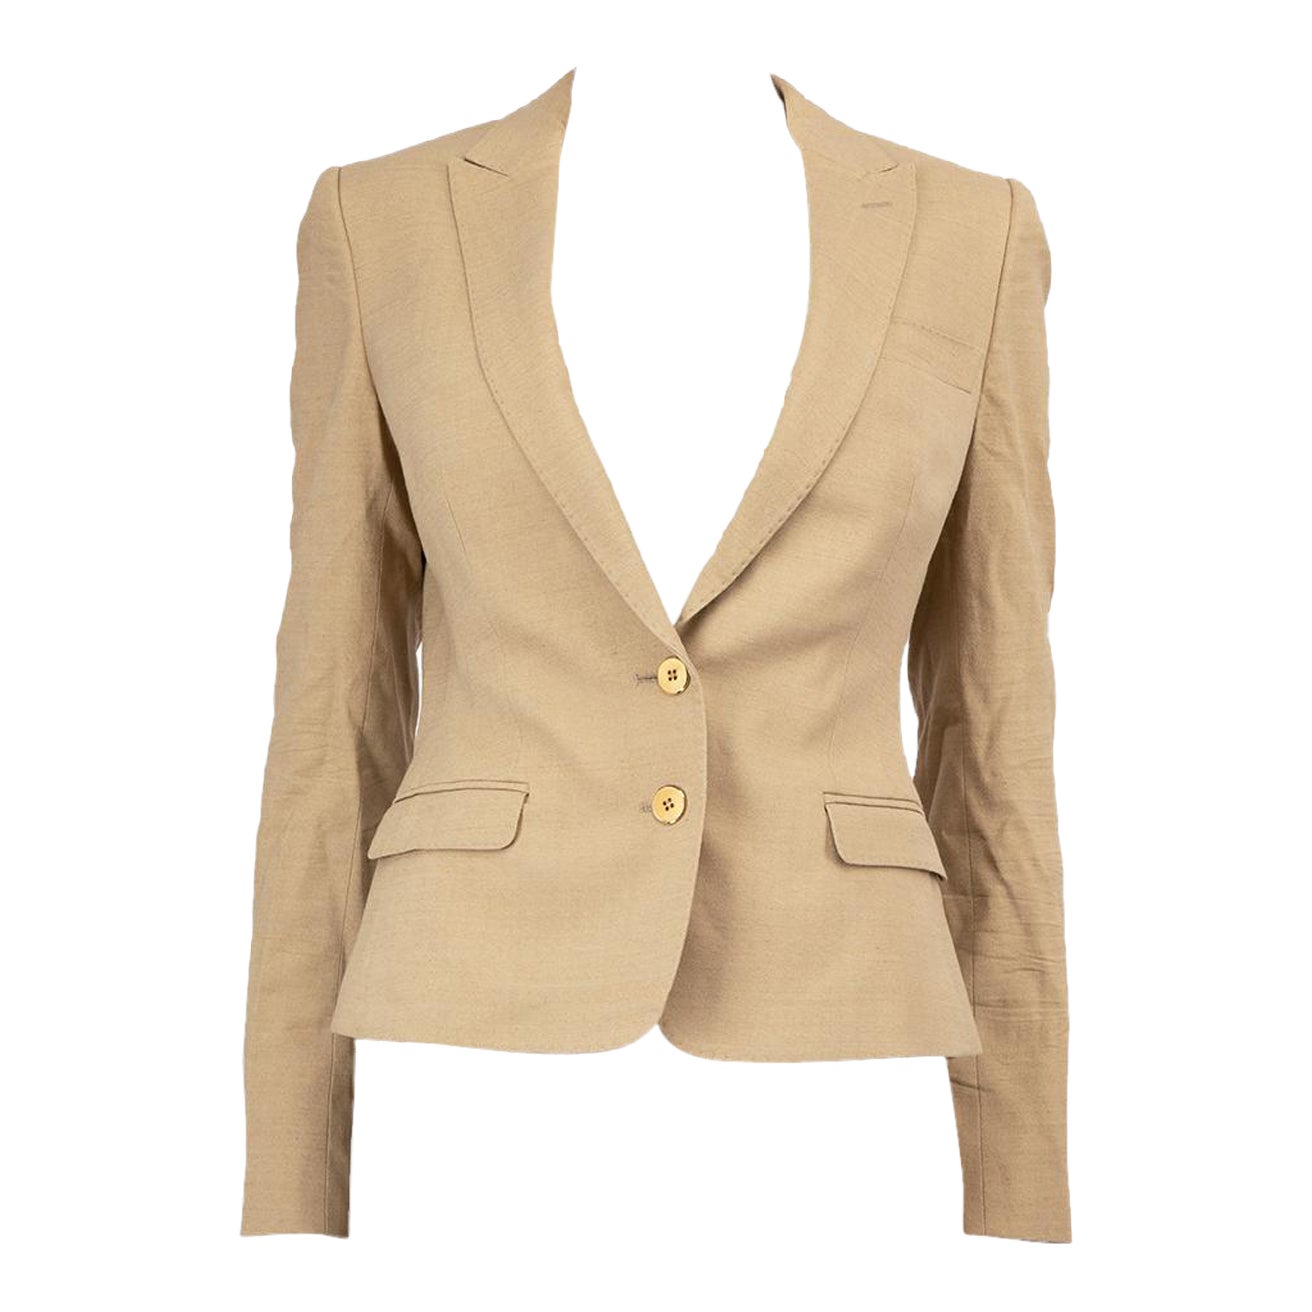 Dolce & Gabbana Beige Single Breasted Tailored Blazer Jacket Size S For Sale